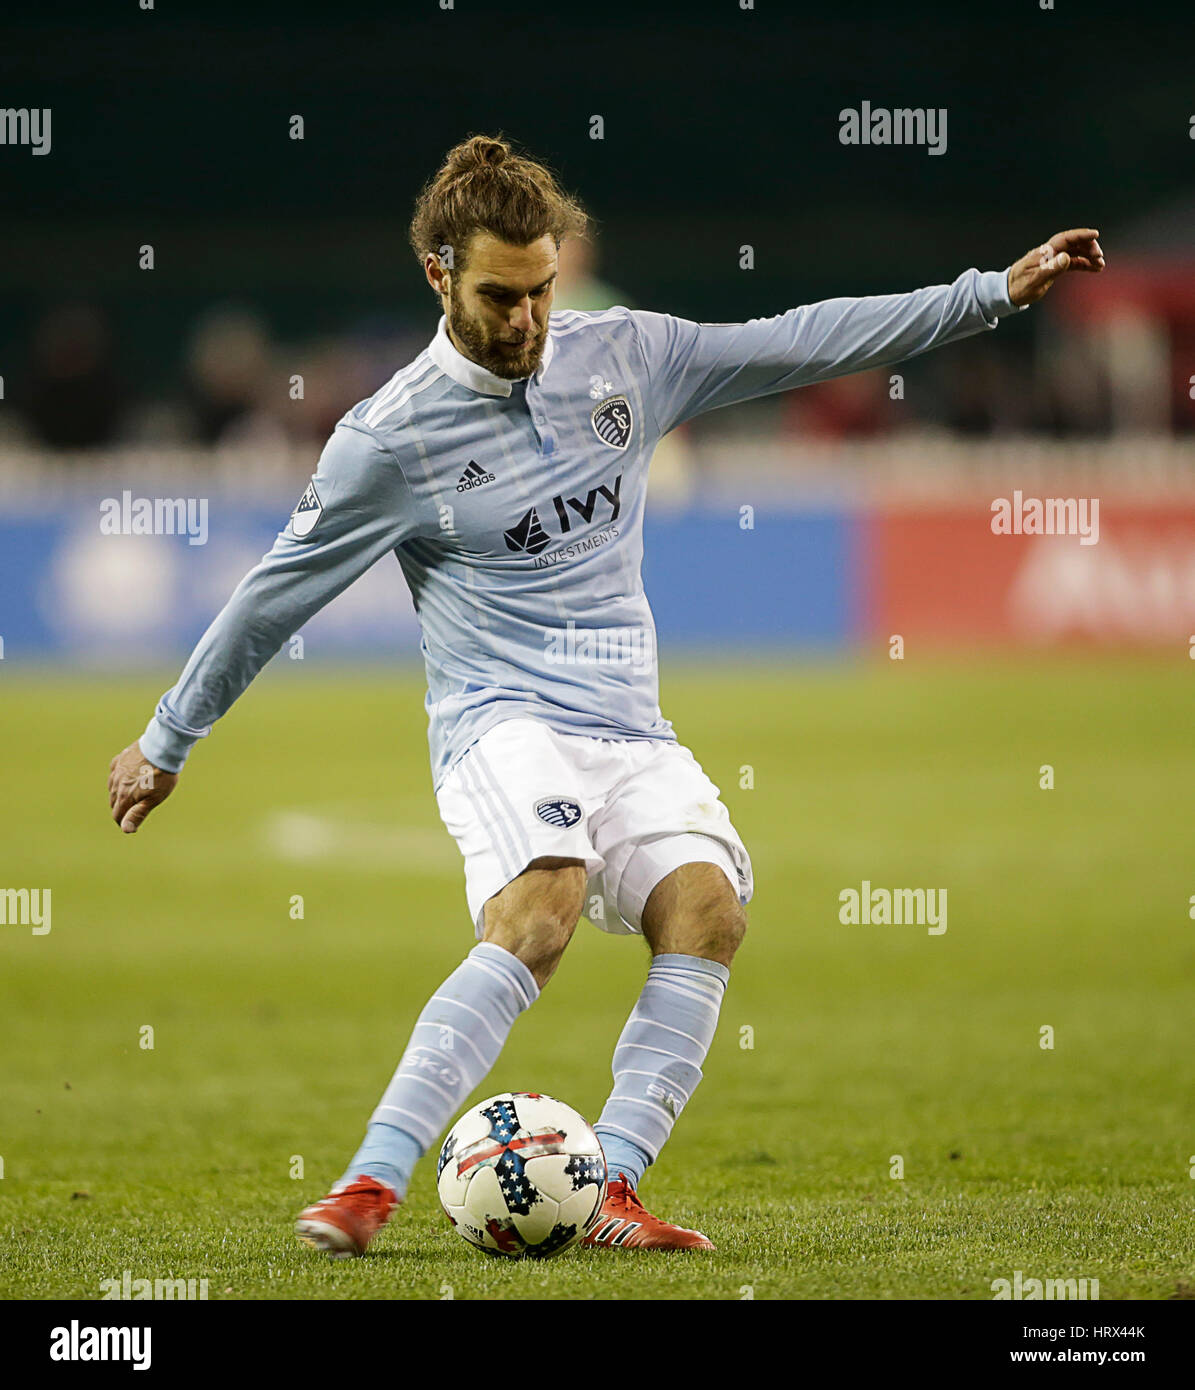 March 4, 2017: Sporting KC Defender #8 Graham Zusi during an MLS soccer match between the D.C. United and the Sporting KC at RFK Stadium in Washington DC. The match ends in a tie. Justin Cooper/CSM Stock Photo